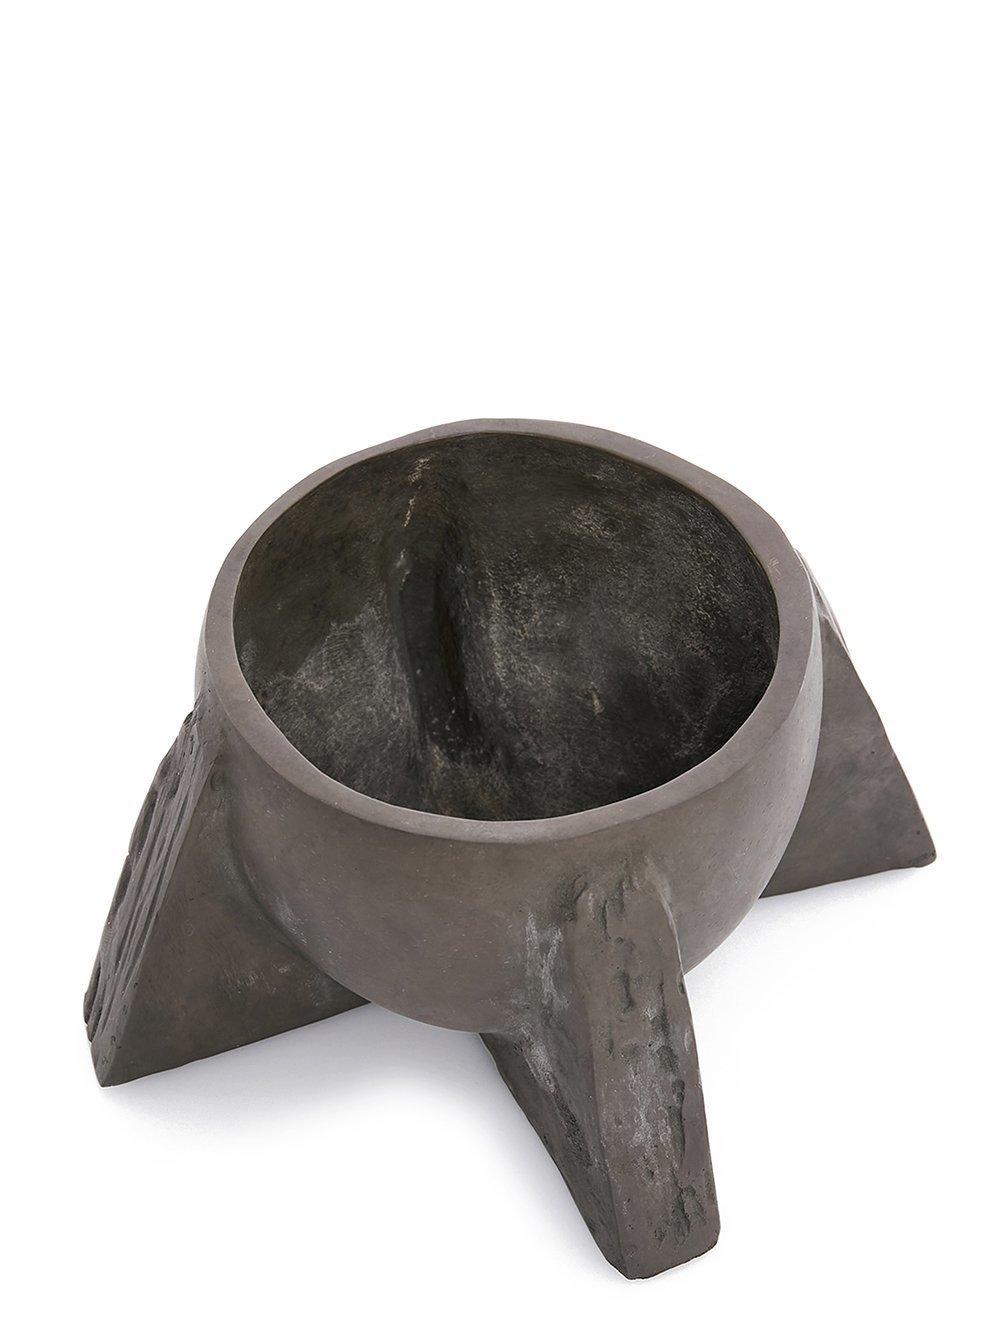 Contemporary bronze coupe by Rick Owens
2007
Dimensions: L 20 x W 20 cm
Materials: Bronze
Weight: 3 kg

Available in black finish or Nitrate (Dark Brown) finish.

Rick Owens is a California-born fashion and furniture has developed a unique